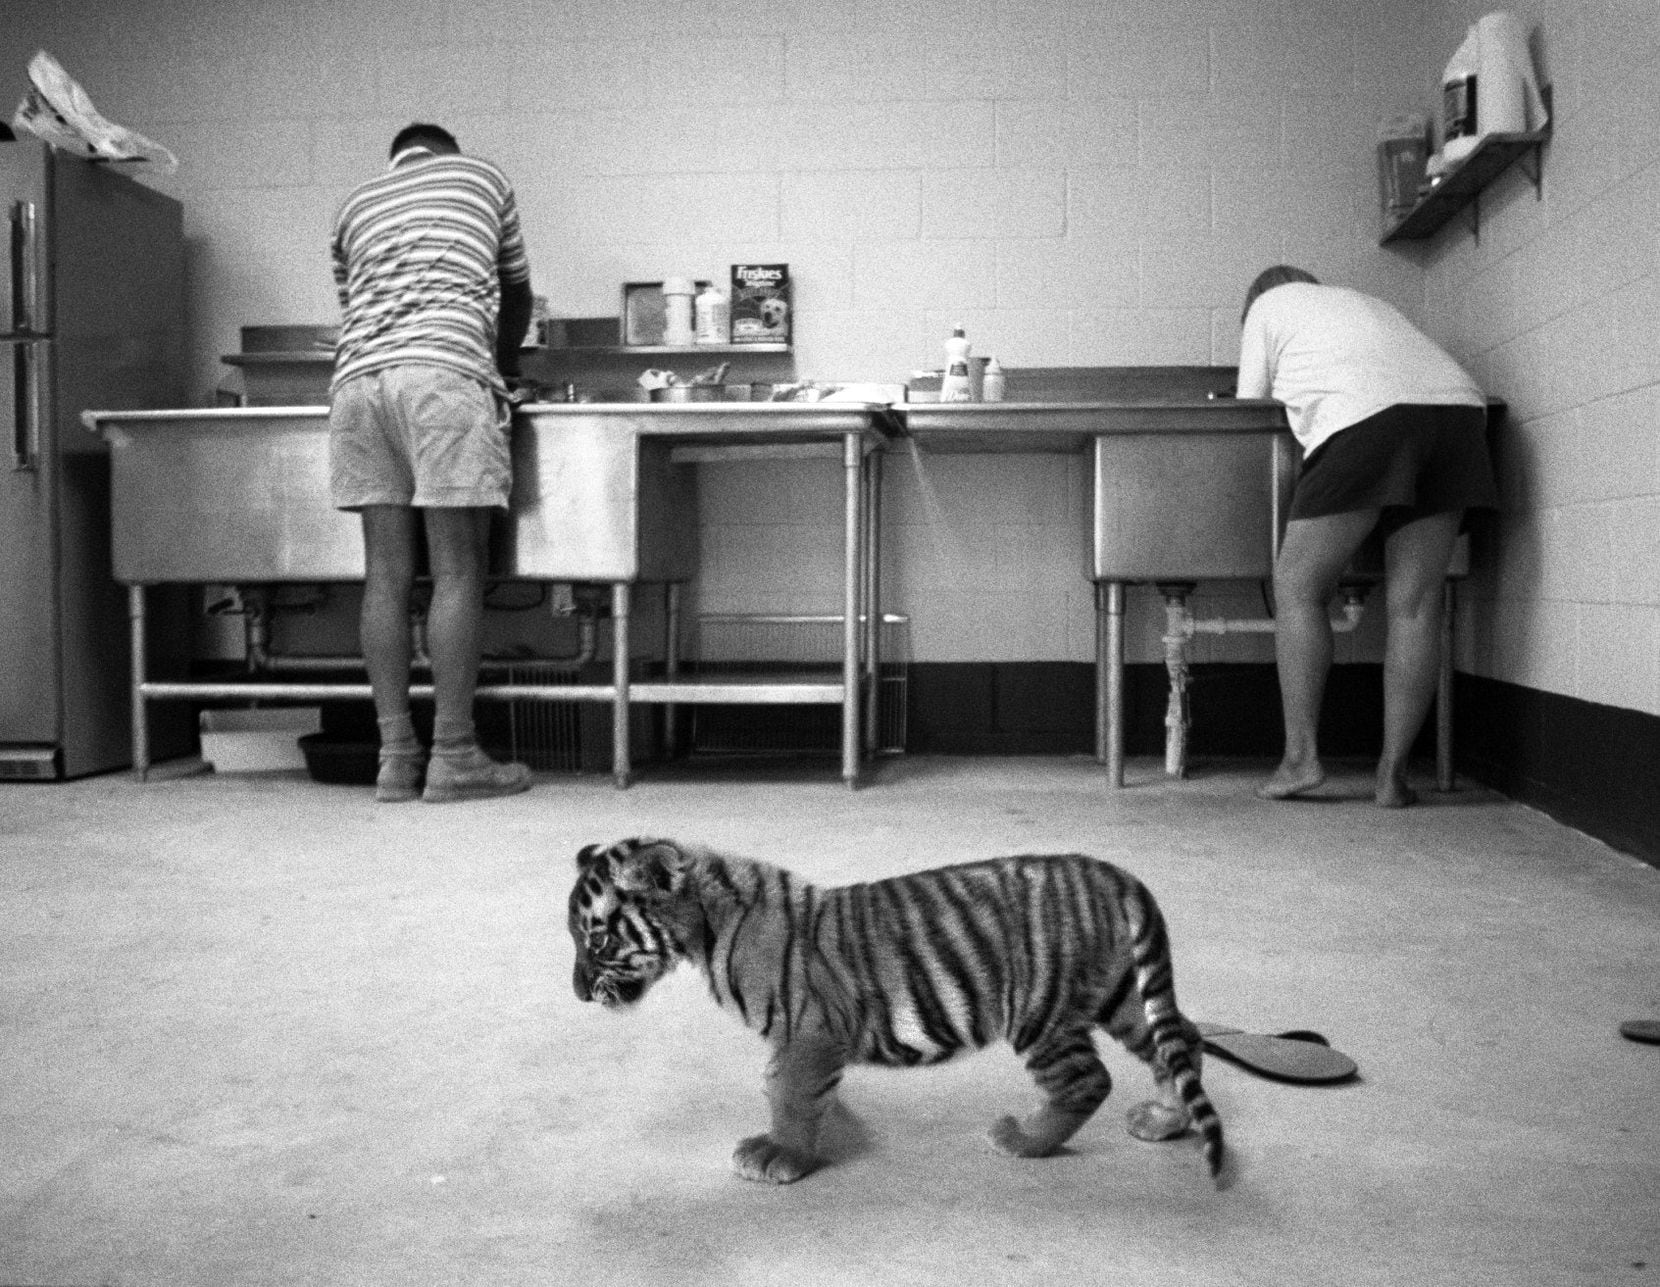 May 17, 1994 - A baby tiger wanders across the  floor of the 'cat kitchen' while Robert and...